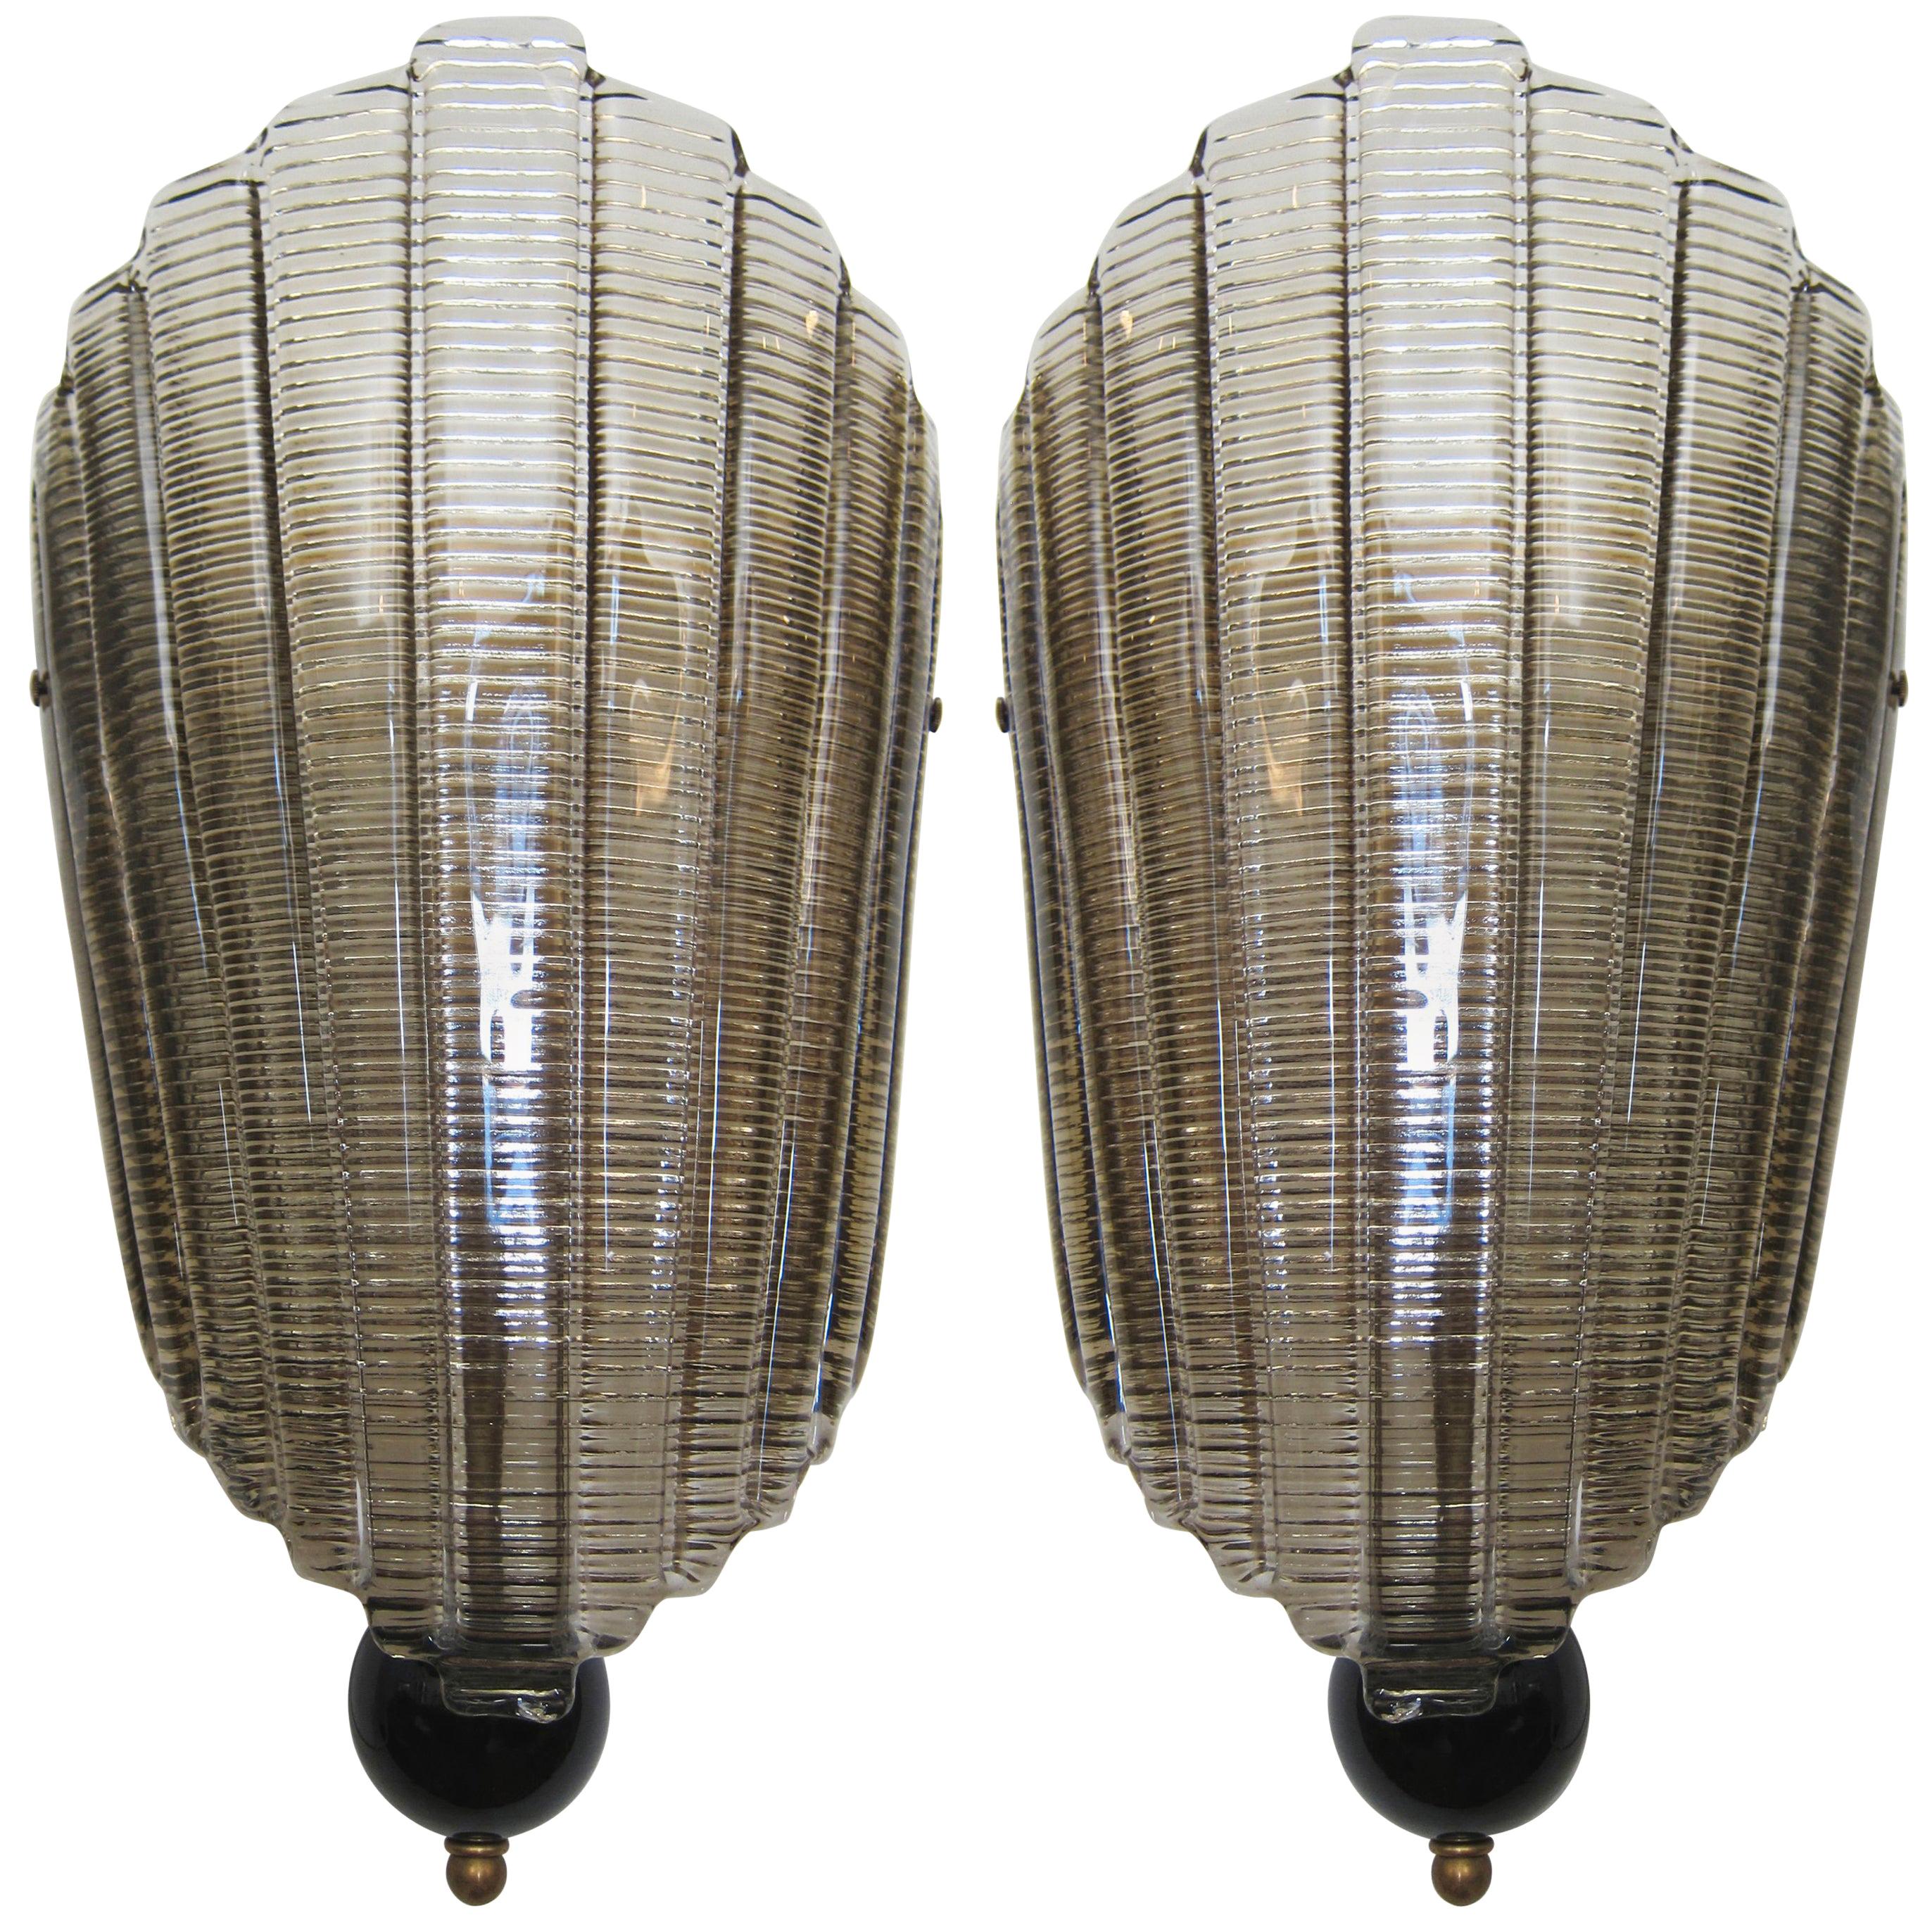 Pair of Murano Glass Wall Sconces, Art Deco Style, in Stock